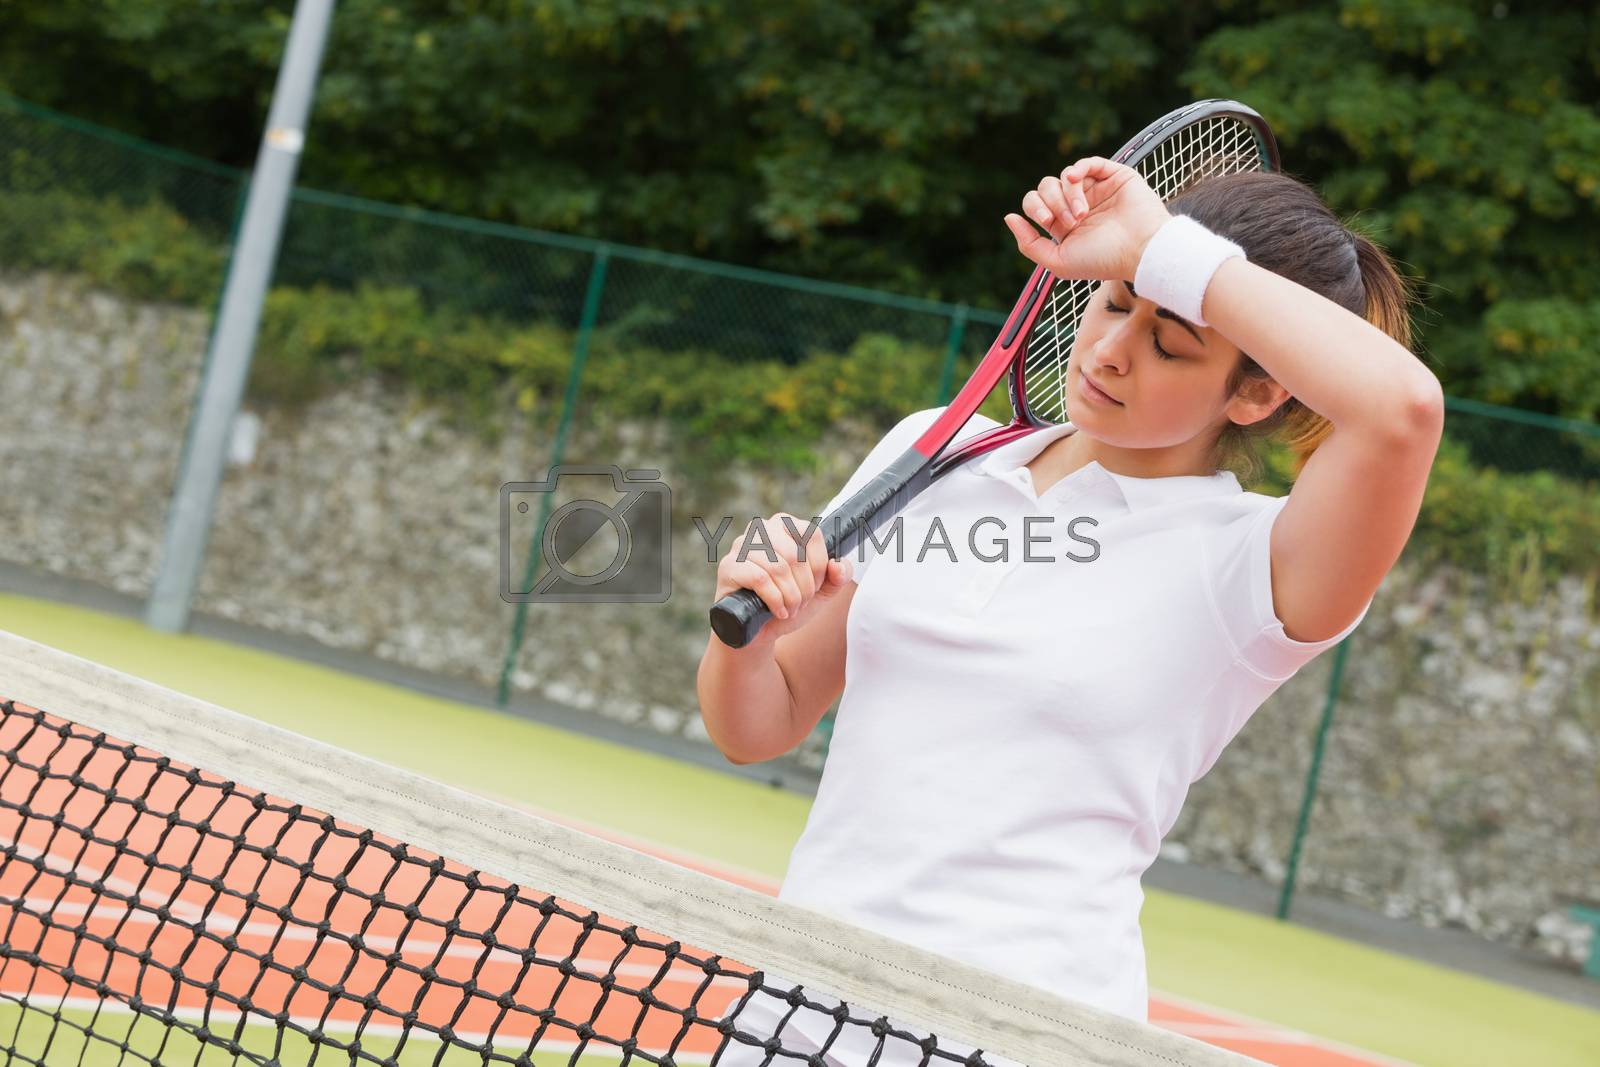 Royalty free image of Pretty tennis player wiping her brow by Wavebreakmedia